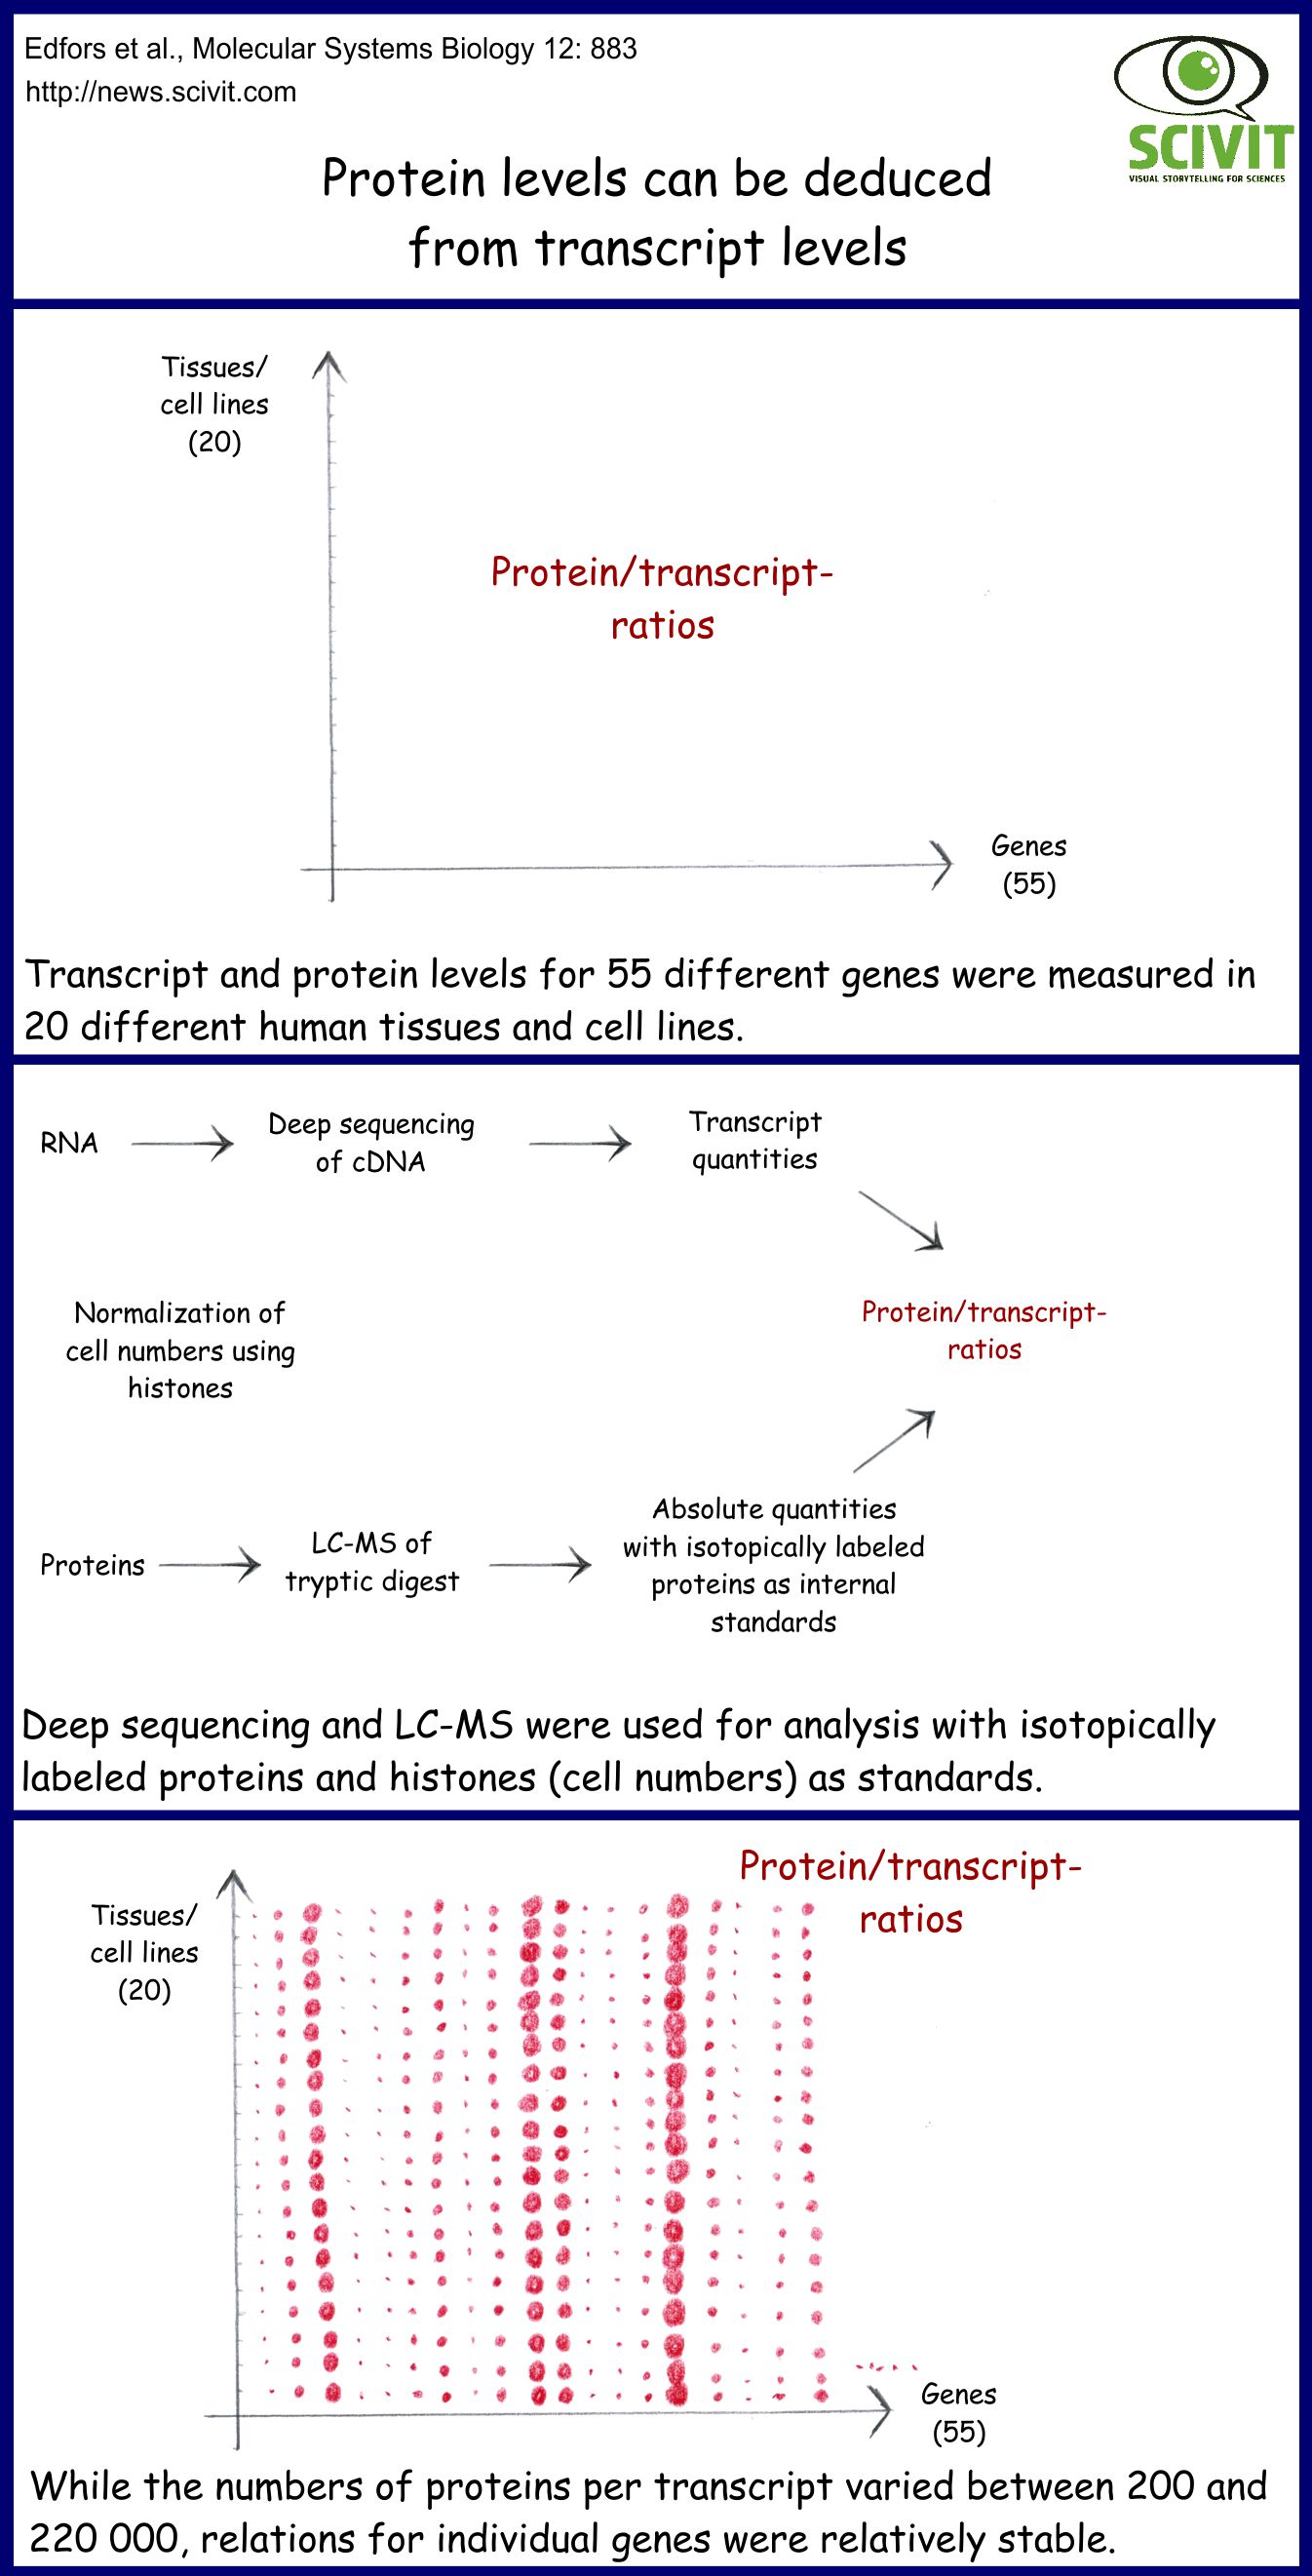 Protein levels can be deduced from transcript levels